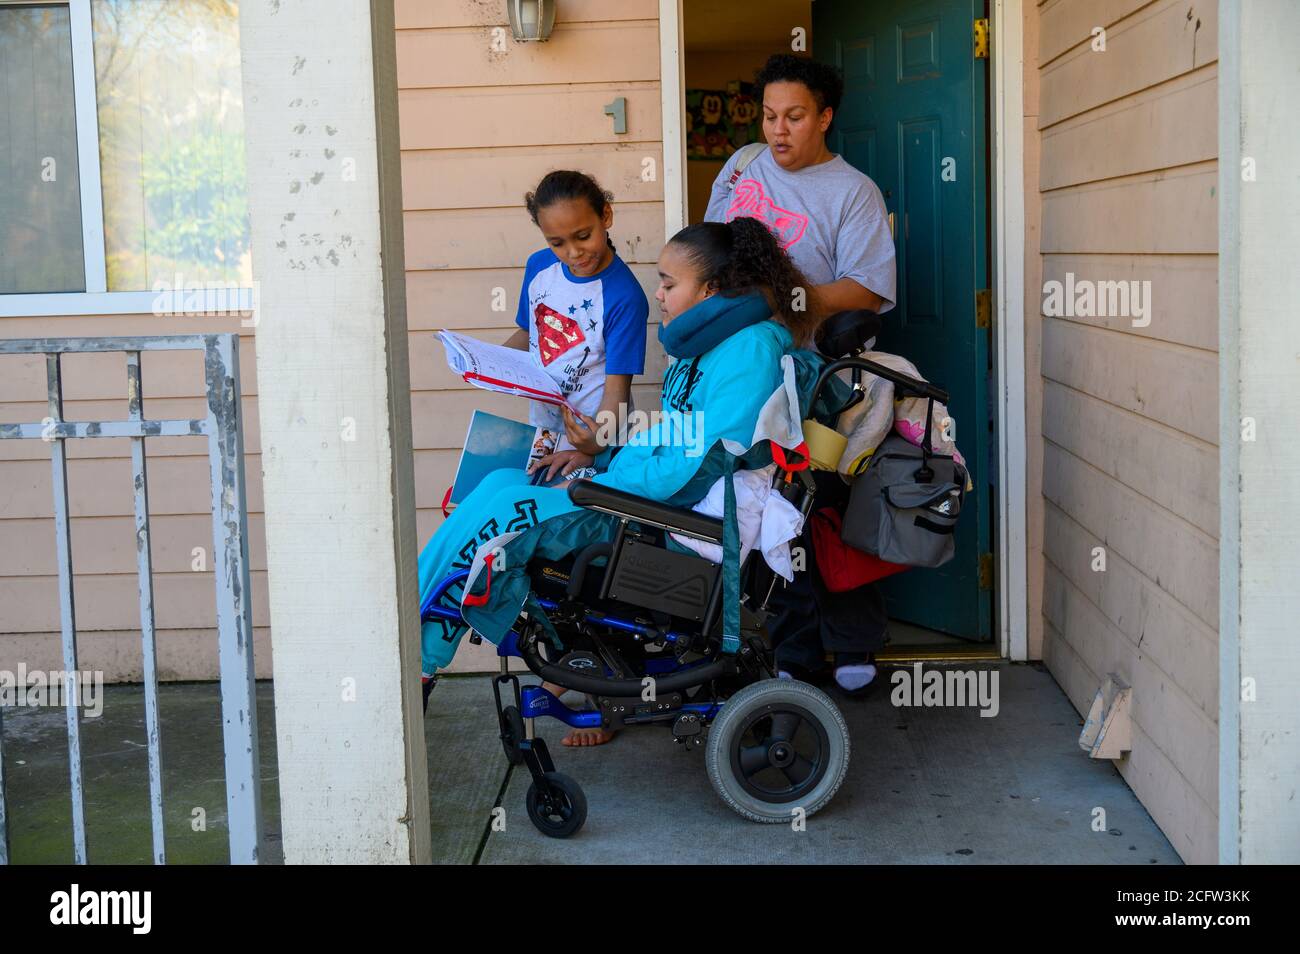 Sacramento, California, USA. 10th Feb, 2019. FELICIA CLARK pushes daughter FELICIA BRENT-VELASQUEZ'S wheelchair to catch the bus to school as her son David shows his homework to his sister. 'We moved her here and been trying to figure out her new way of life. What that means is getting her back into school. All of my children have to go to school, education is key. I want her to do whatever she can with her brain. She's got full brain function. I don't want her to waste it, ' she said. Her daughter died in June 2020 after suffering a stroke and aneurysm. (Credit Image: © Renee C. Byer/Sacram Stock Photo